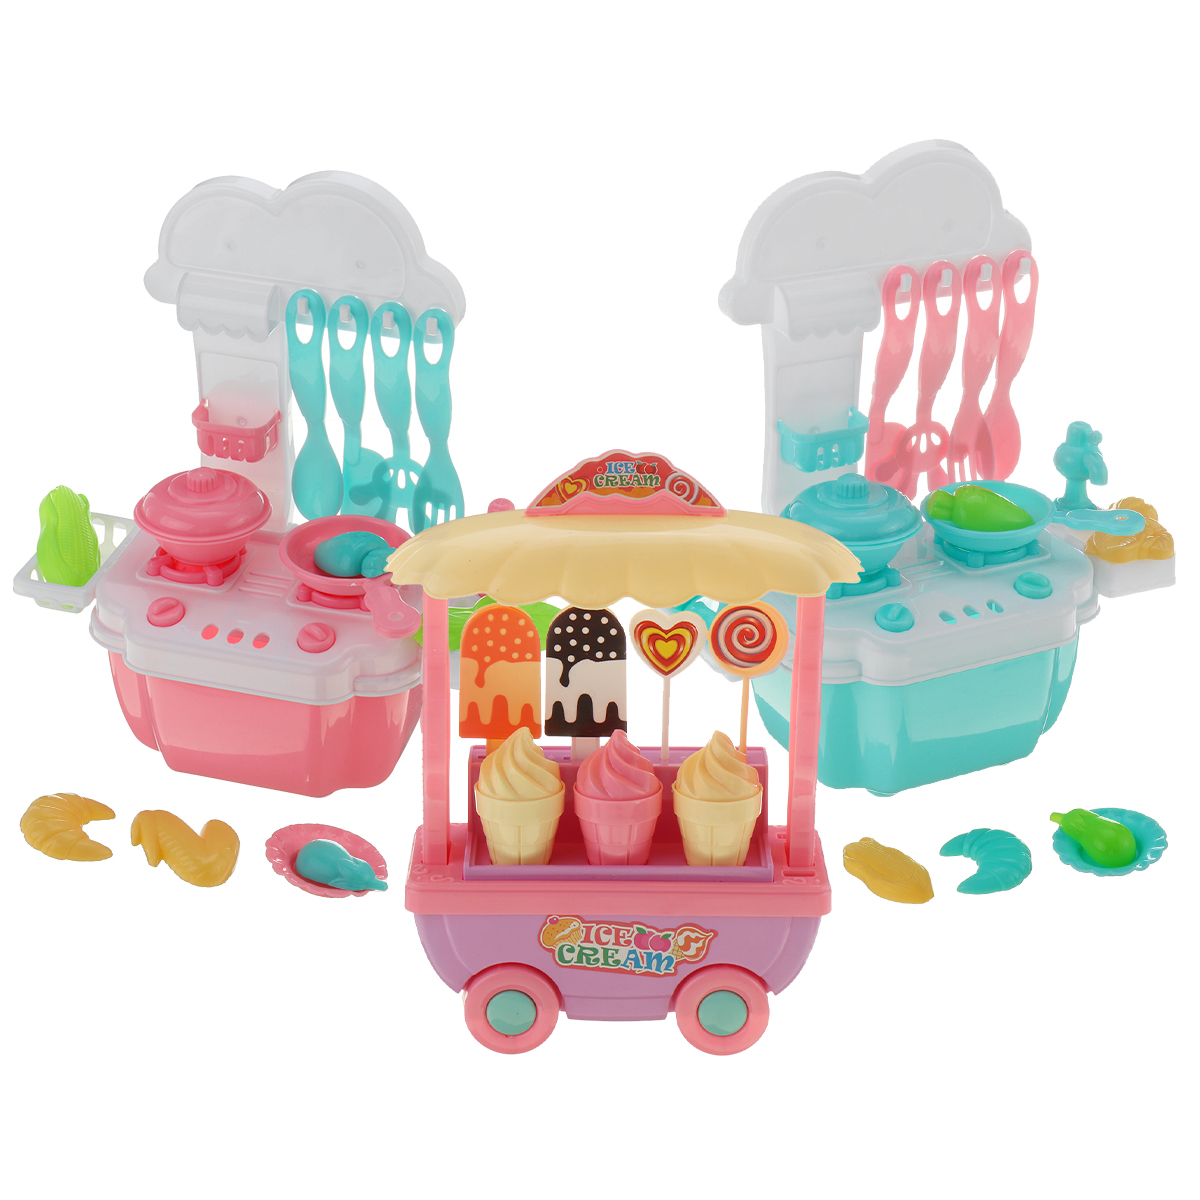 Kid-Play-House-Toy-Kitchen-Cooking-Pots-Pans-Food-Dishes-Cookware-Toys-1628195-2